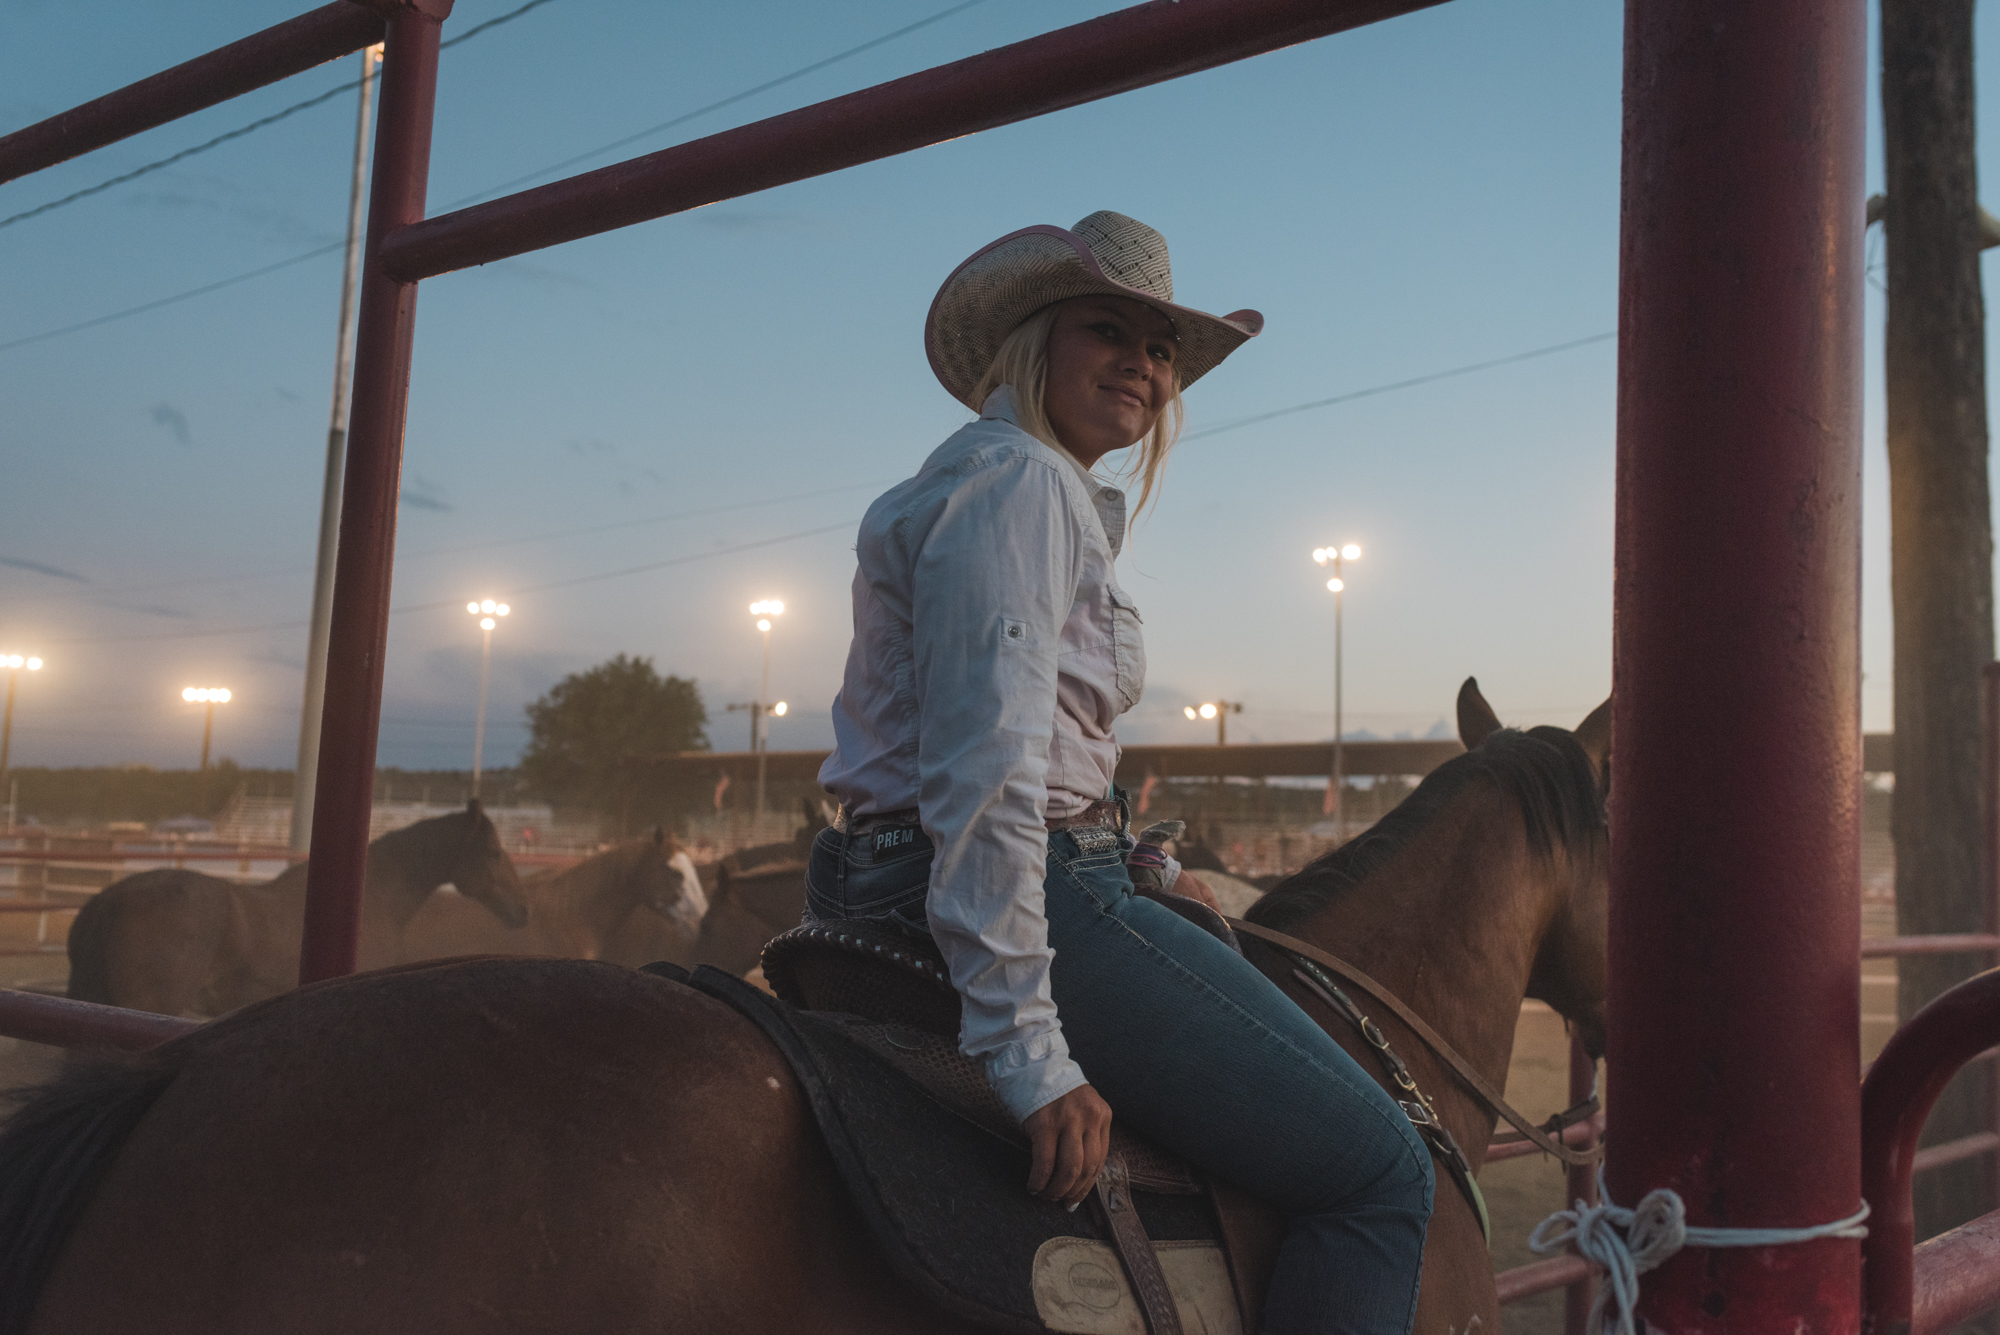 Rodeo_selects-2280.jpg